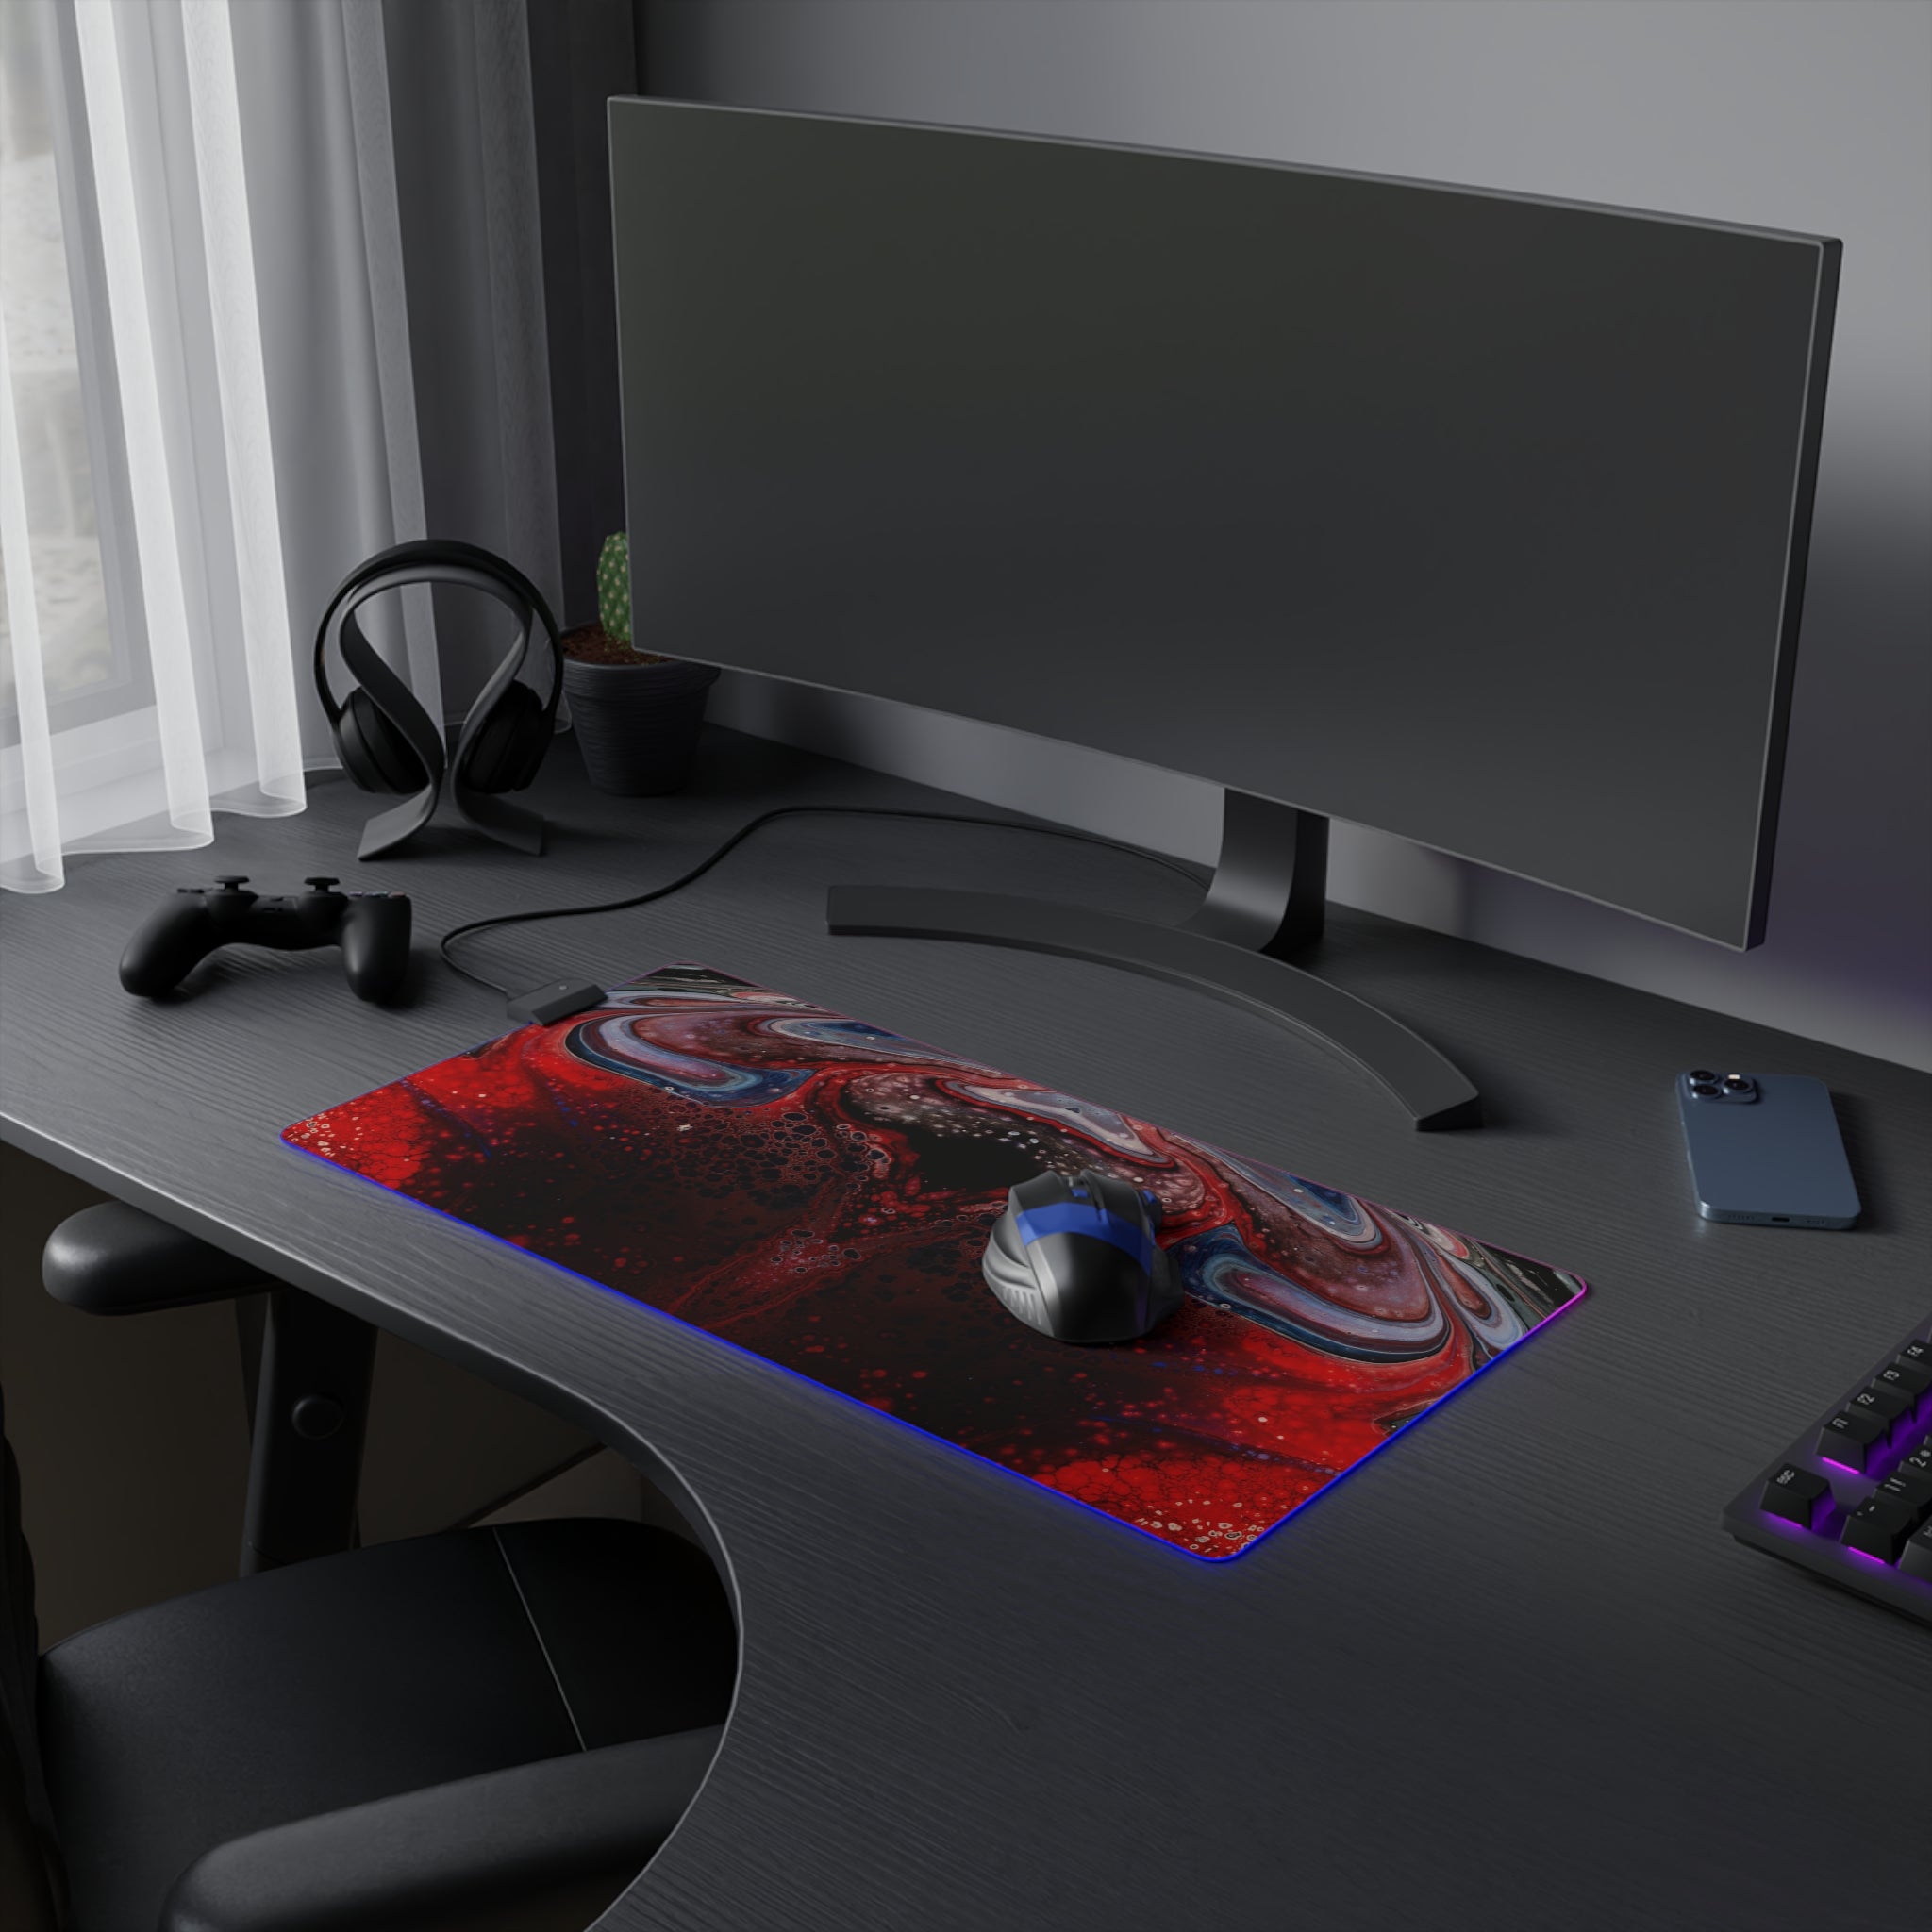 Cameron Creations - LED Gaming Mouse Pad - Window View - Concept 4